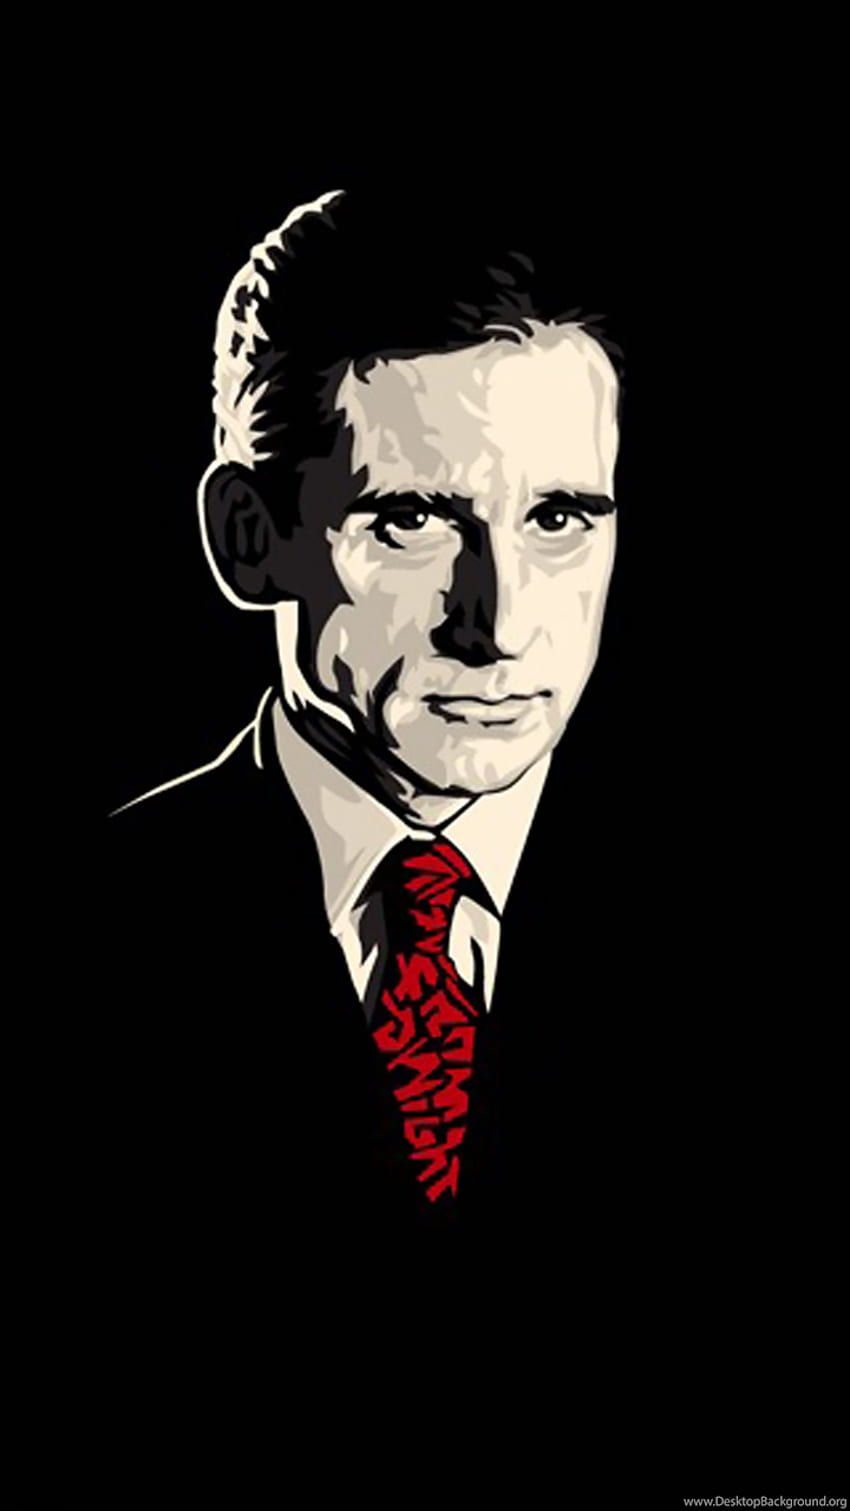 MOBILE Michael Scott In The Style Of The Godfather Imgur Background, Michael Scott The Office HD phone wallpaper